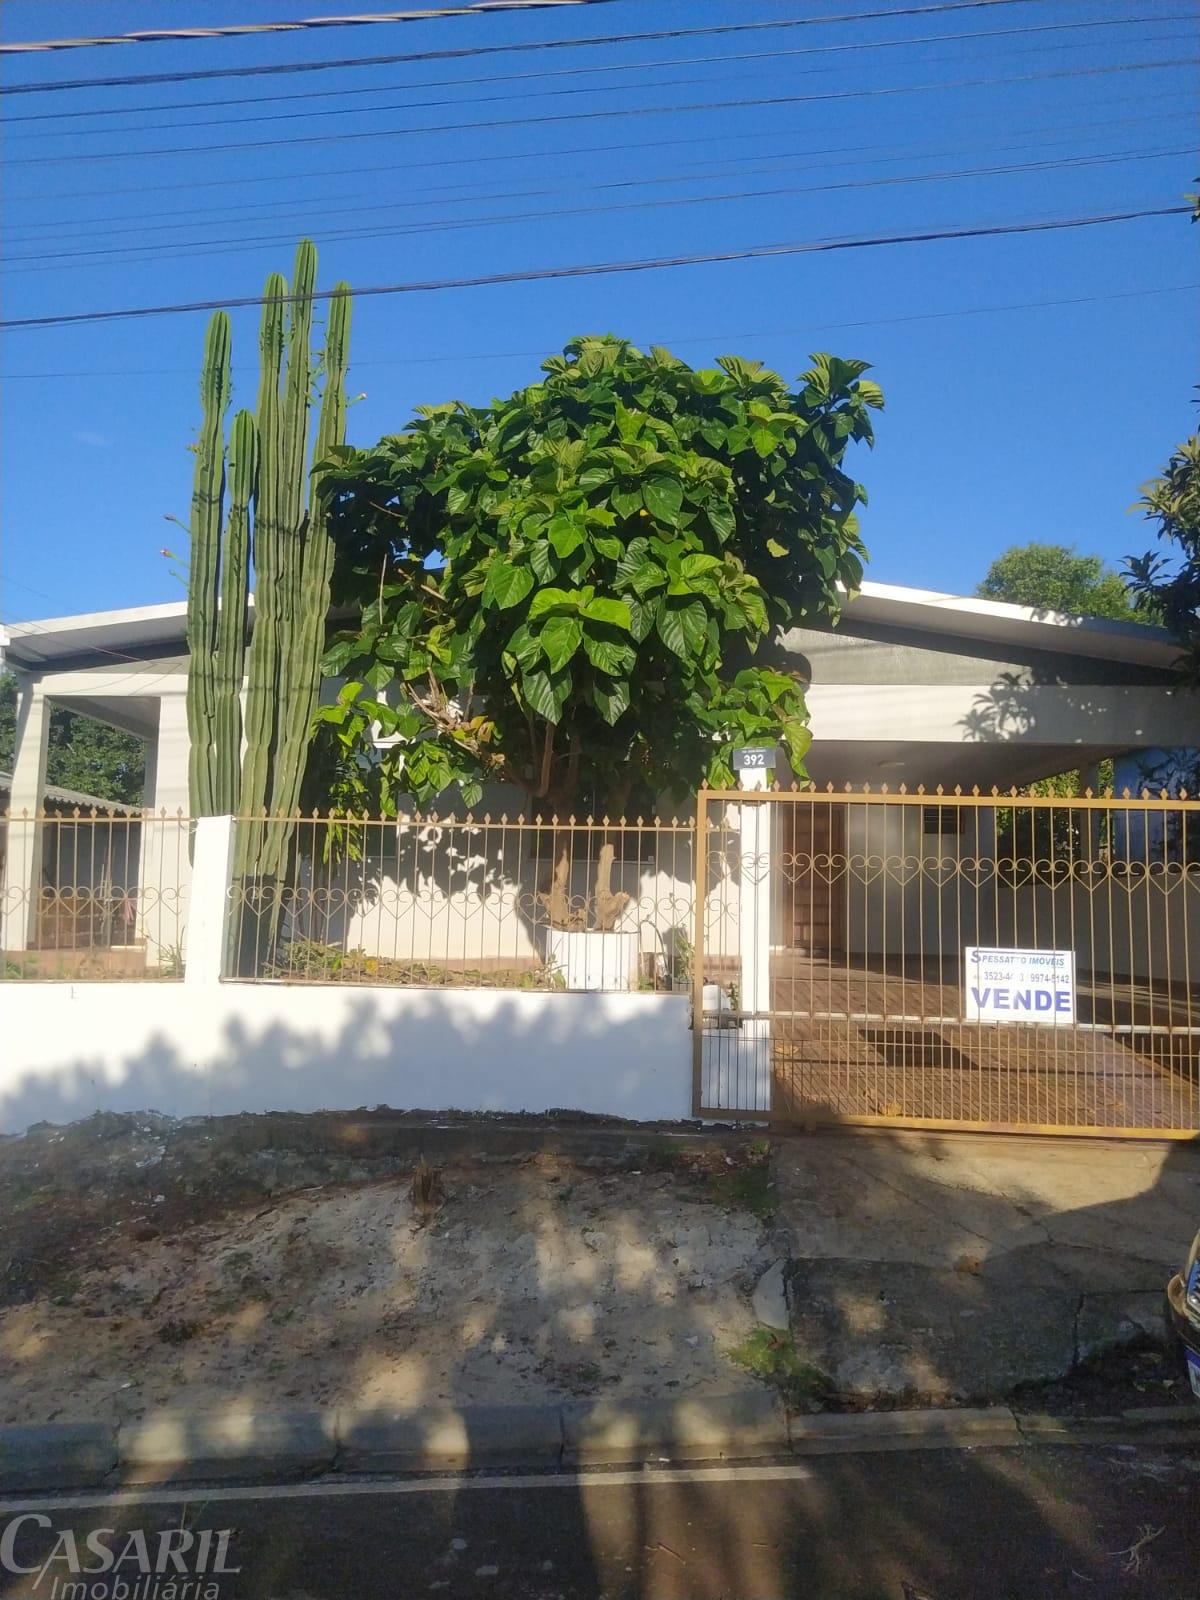 An image of a house listing